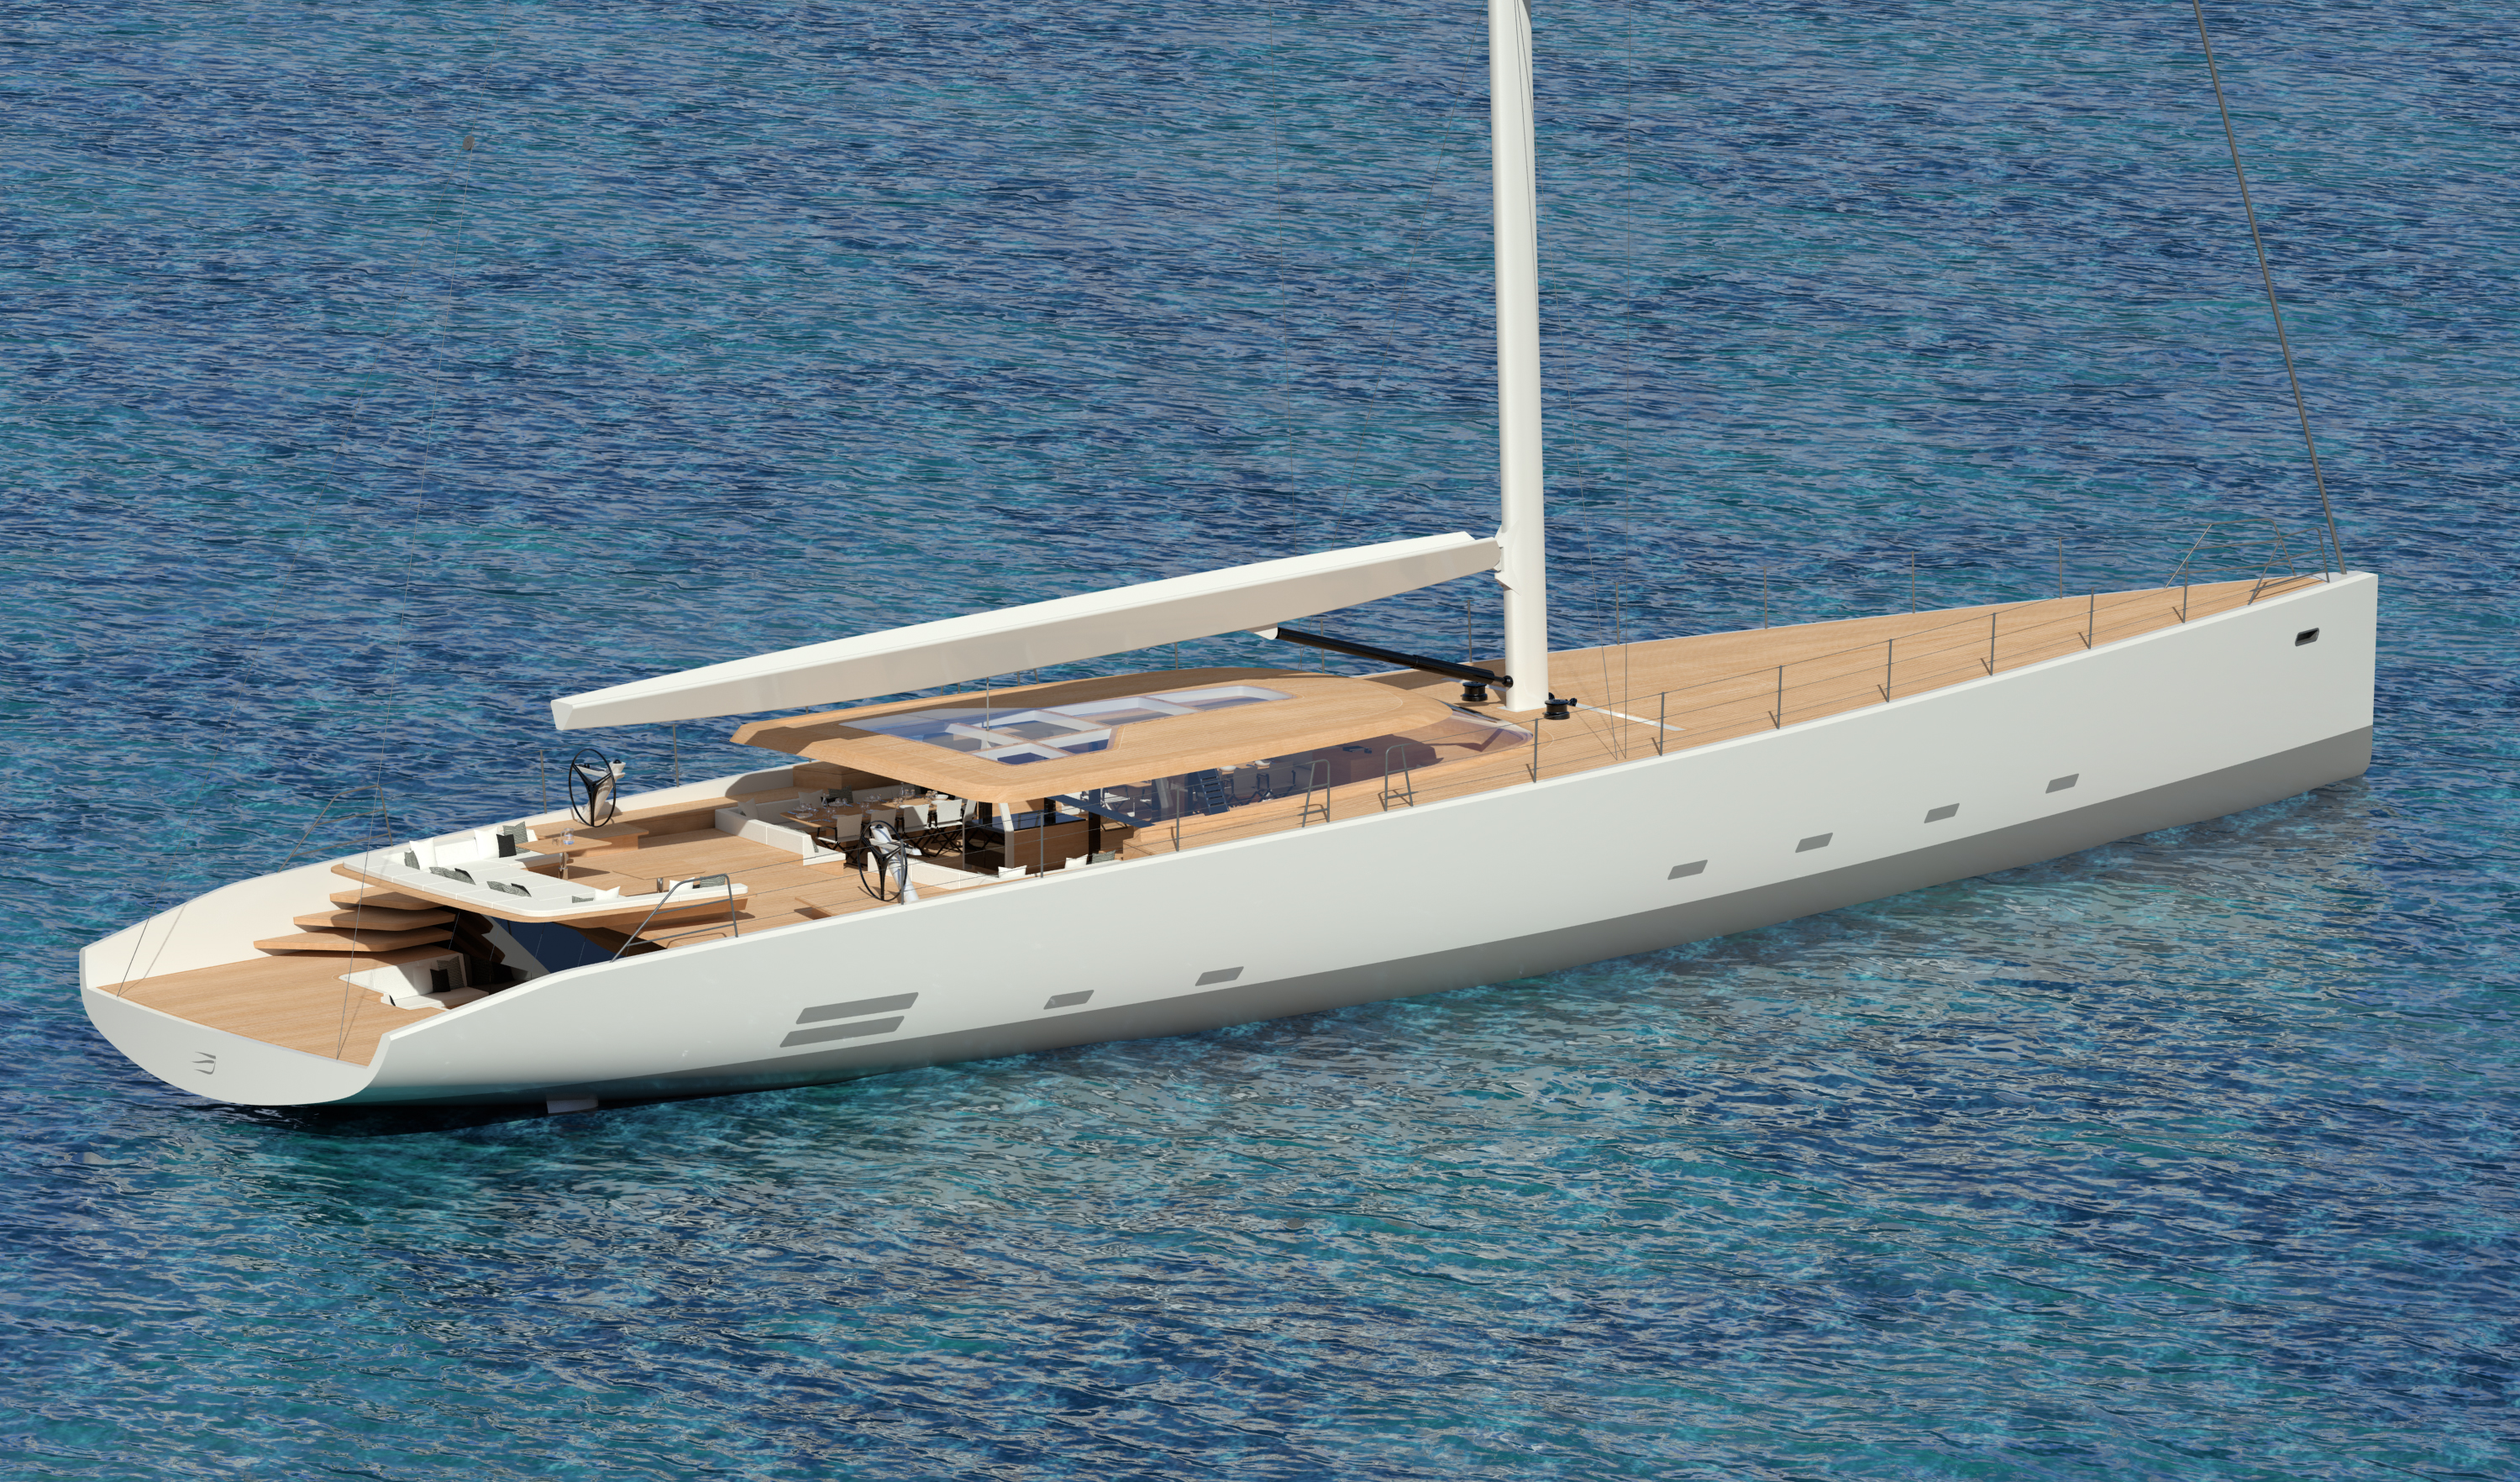 Wally 145 sailing yacht unveiled - Yacht Harbour